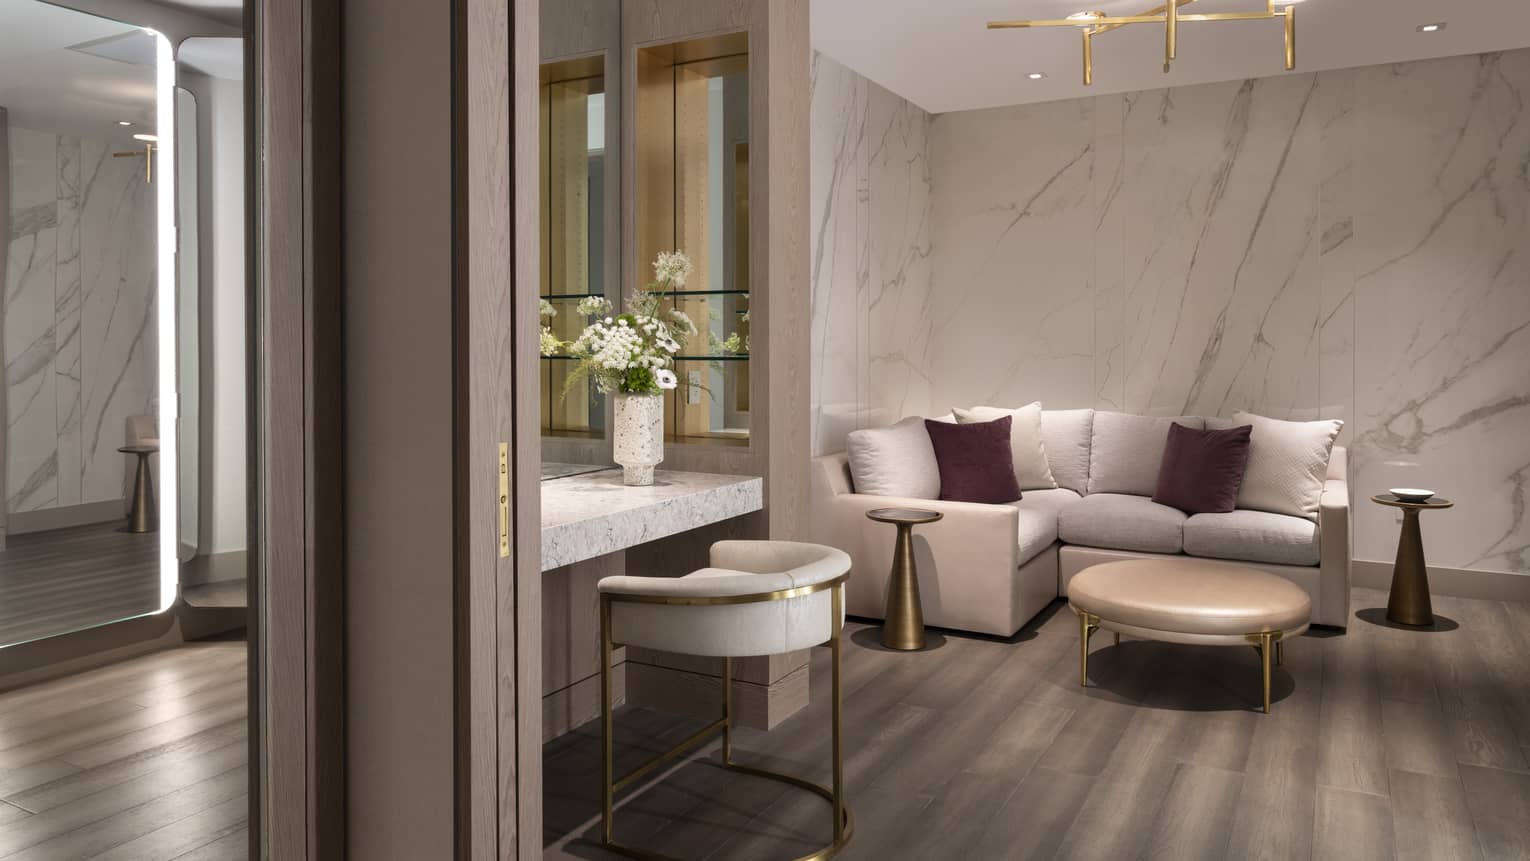 An L-shaped couch, coffee table, mirrors and vanity table fill a corner of the Celebration Suite